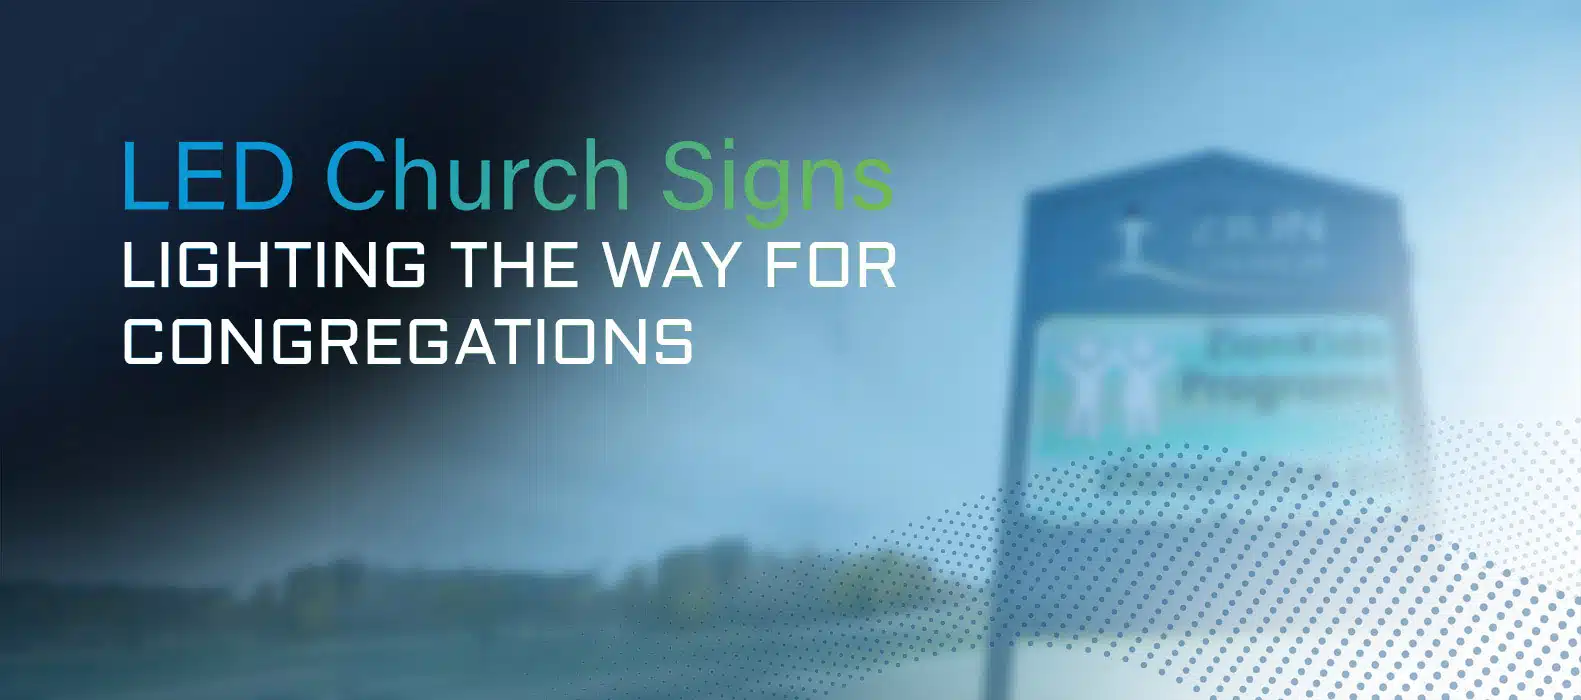 LED Outdoor Digital Church Signs